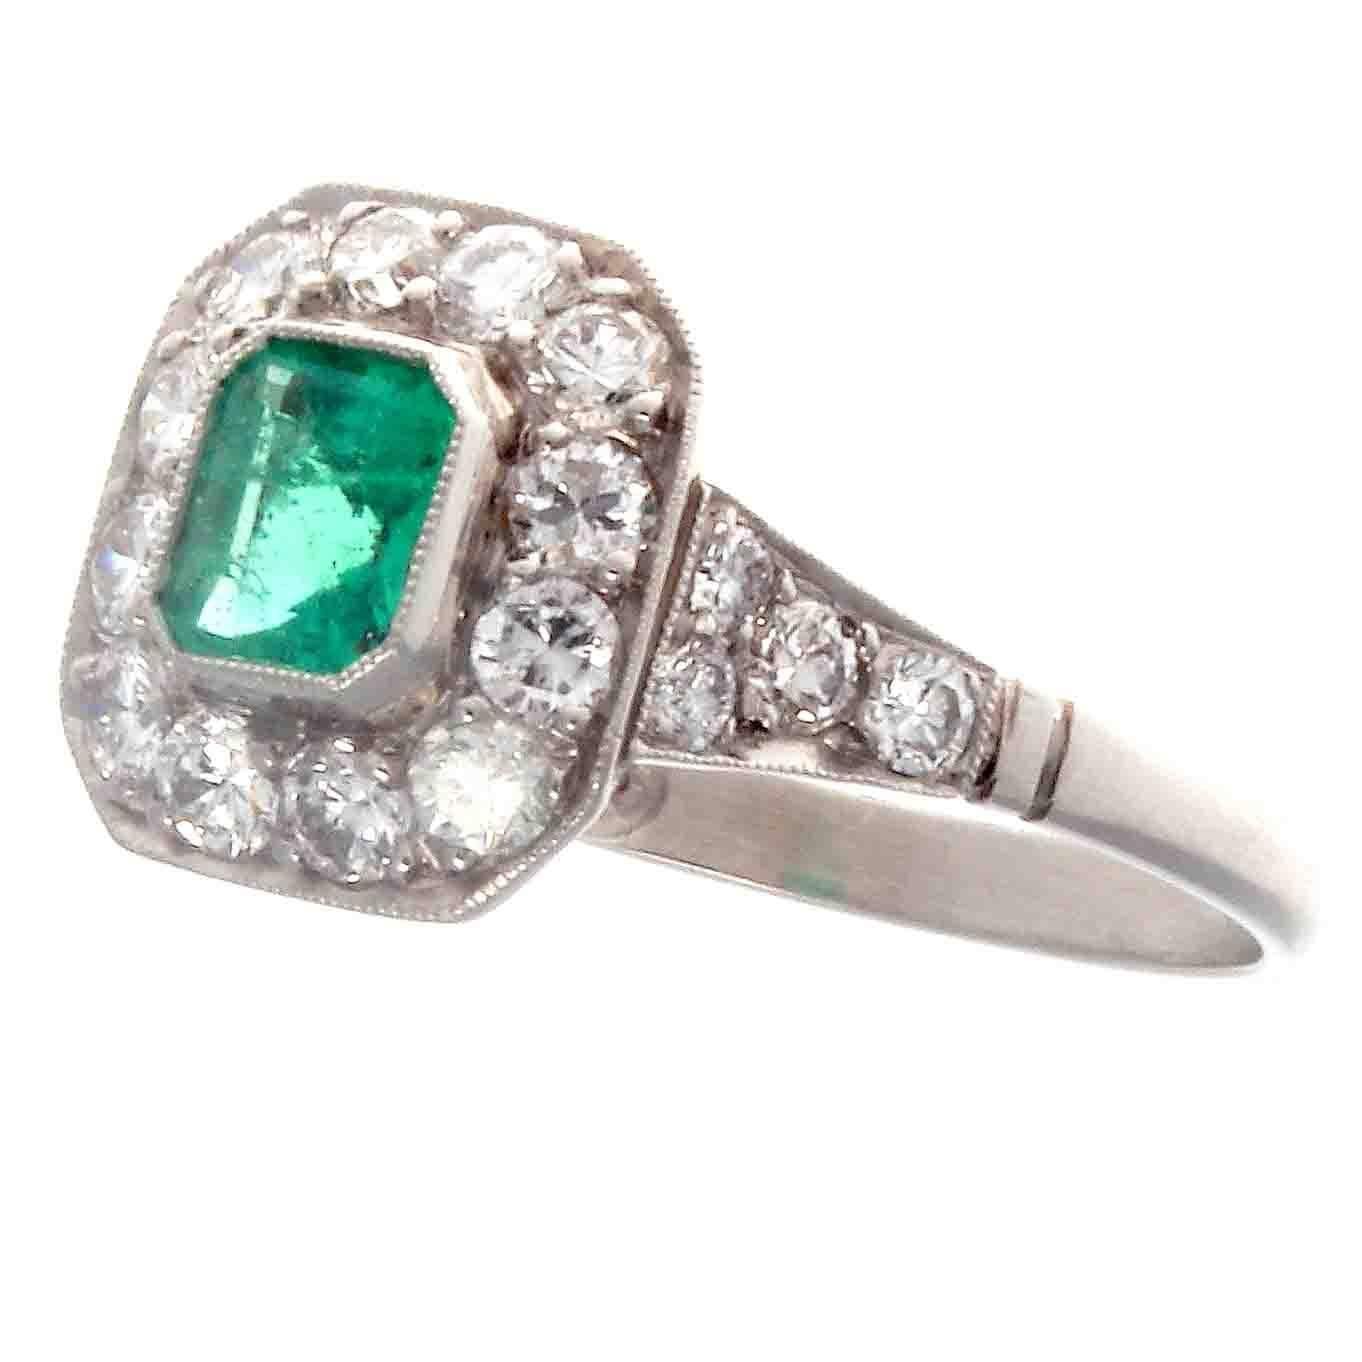 Intrinsically beautiful, using color and traditional design referencing the golden era of art deco jewelry. Featuring a vibrant gem quality emerald surrounded by a halo of near colorless diamonds. Hand crafted in platinum.

Ring size 6 and can